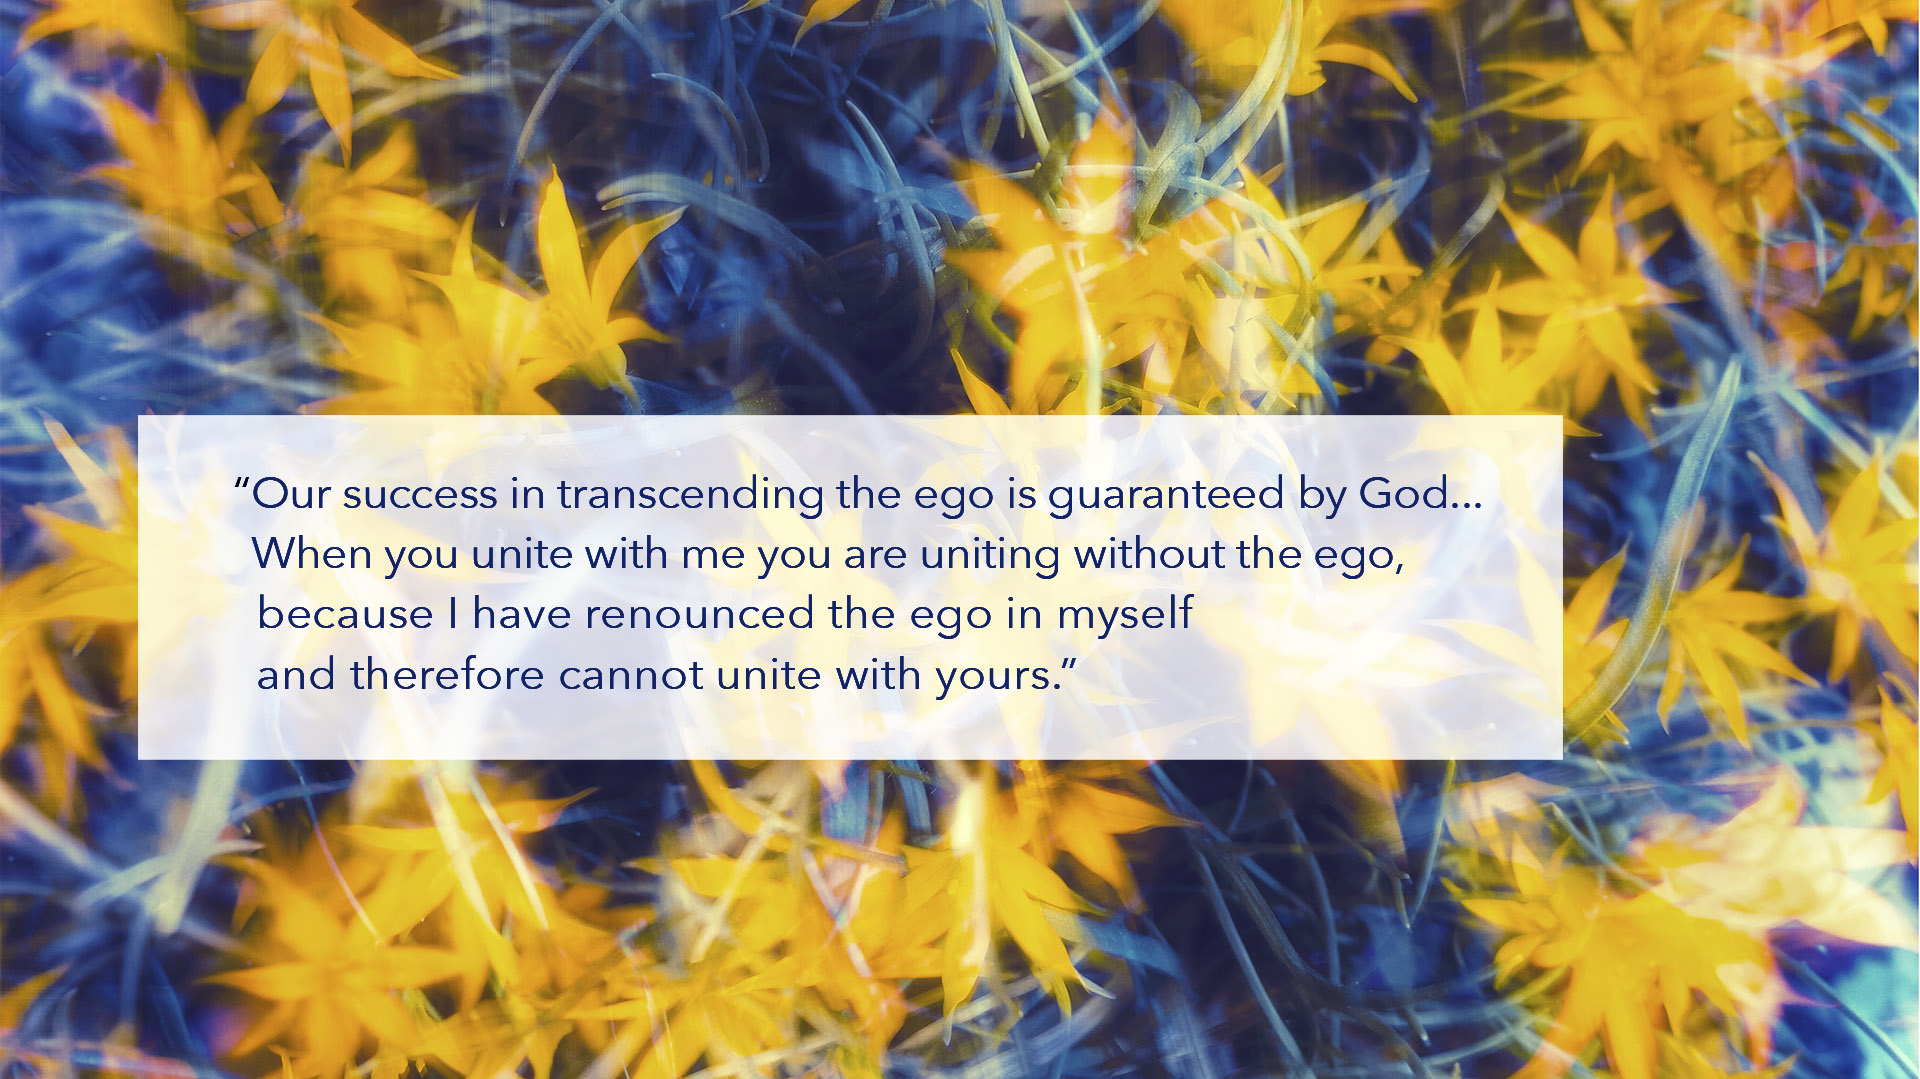 Our success in transcending the ego is guaranteed by God...When you unite with me you are uniting without the ego, because I have renounced the ego in myself and therefore cannot unite with yours